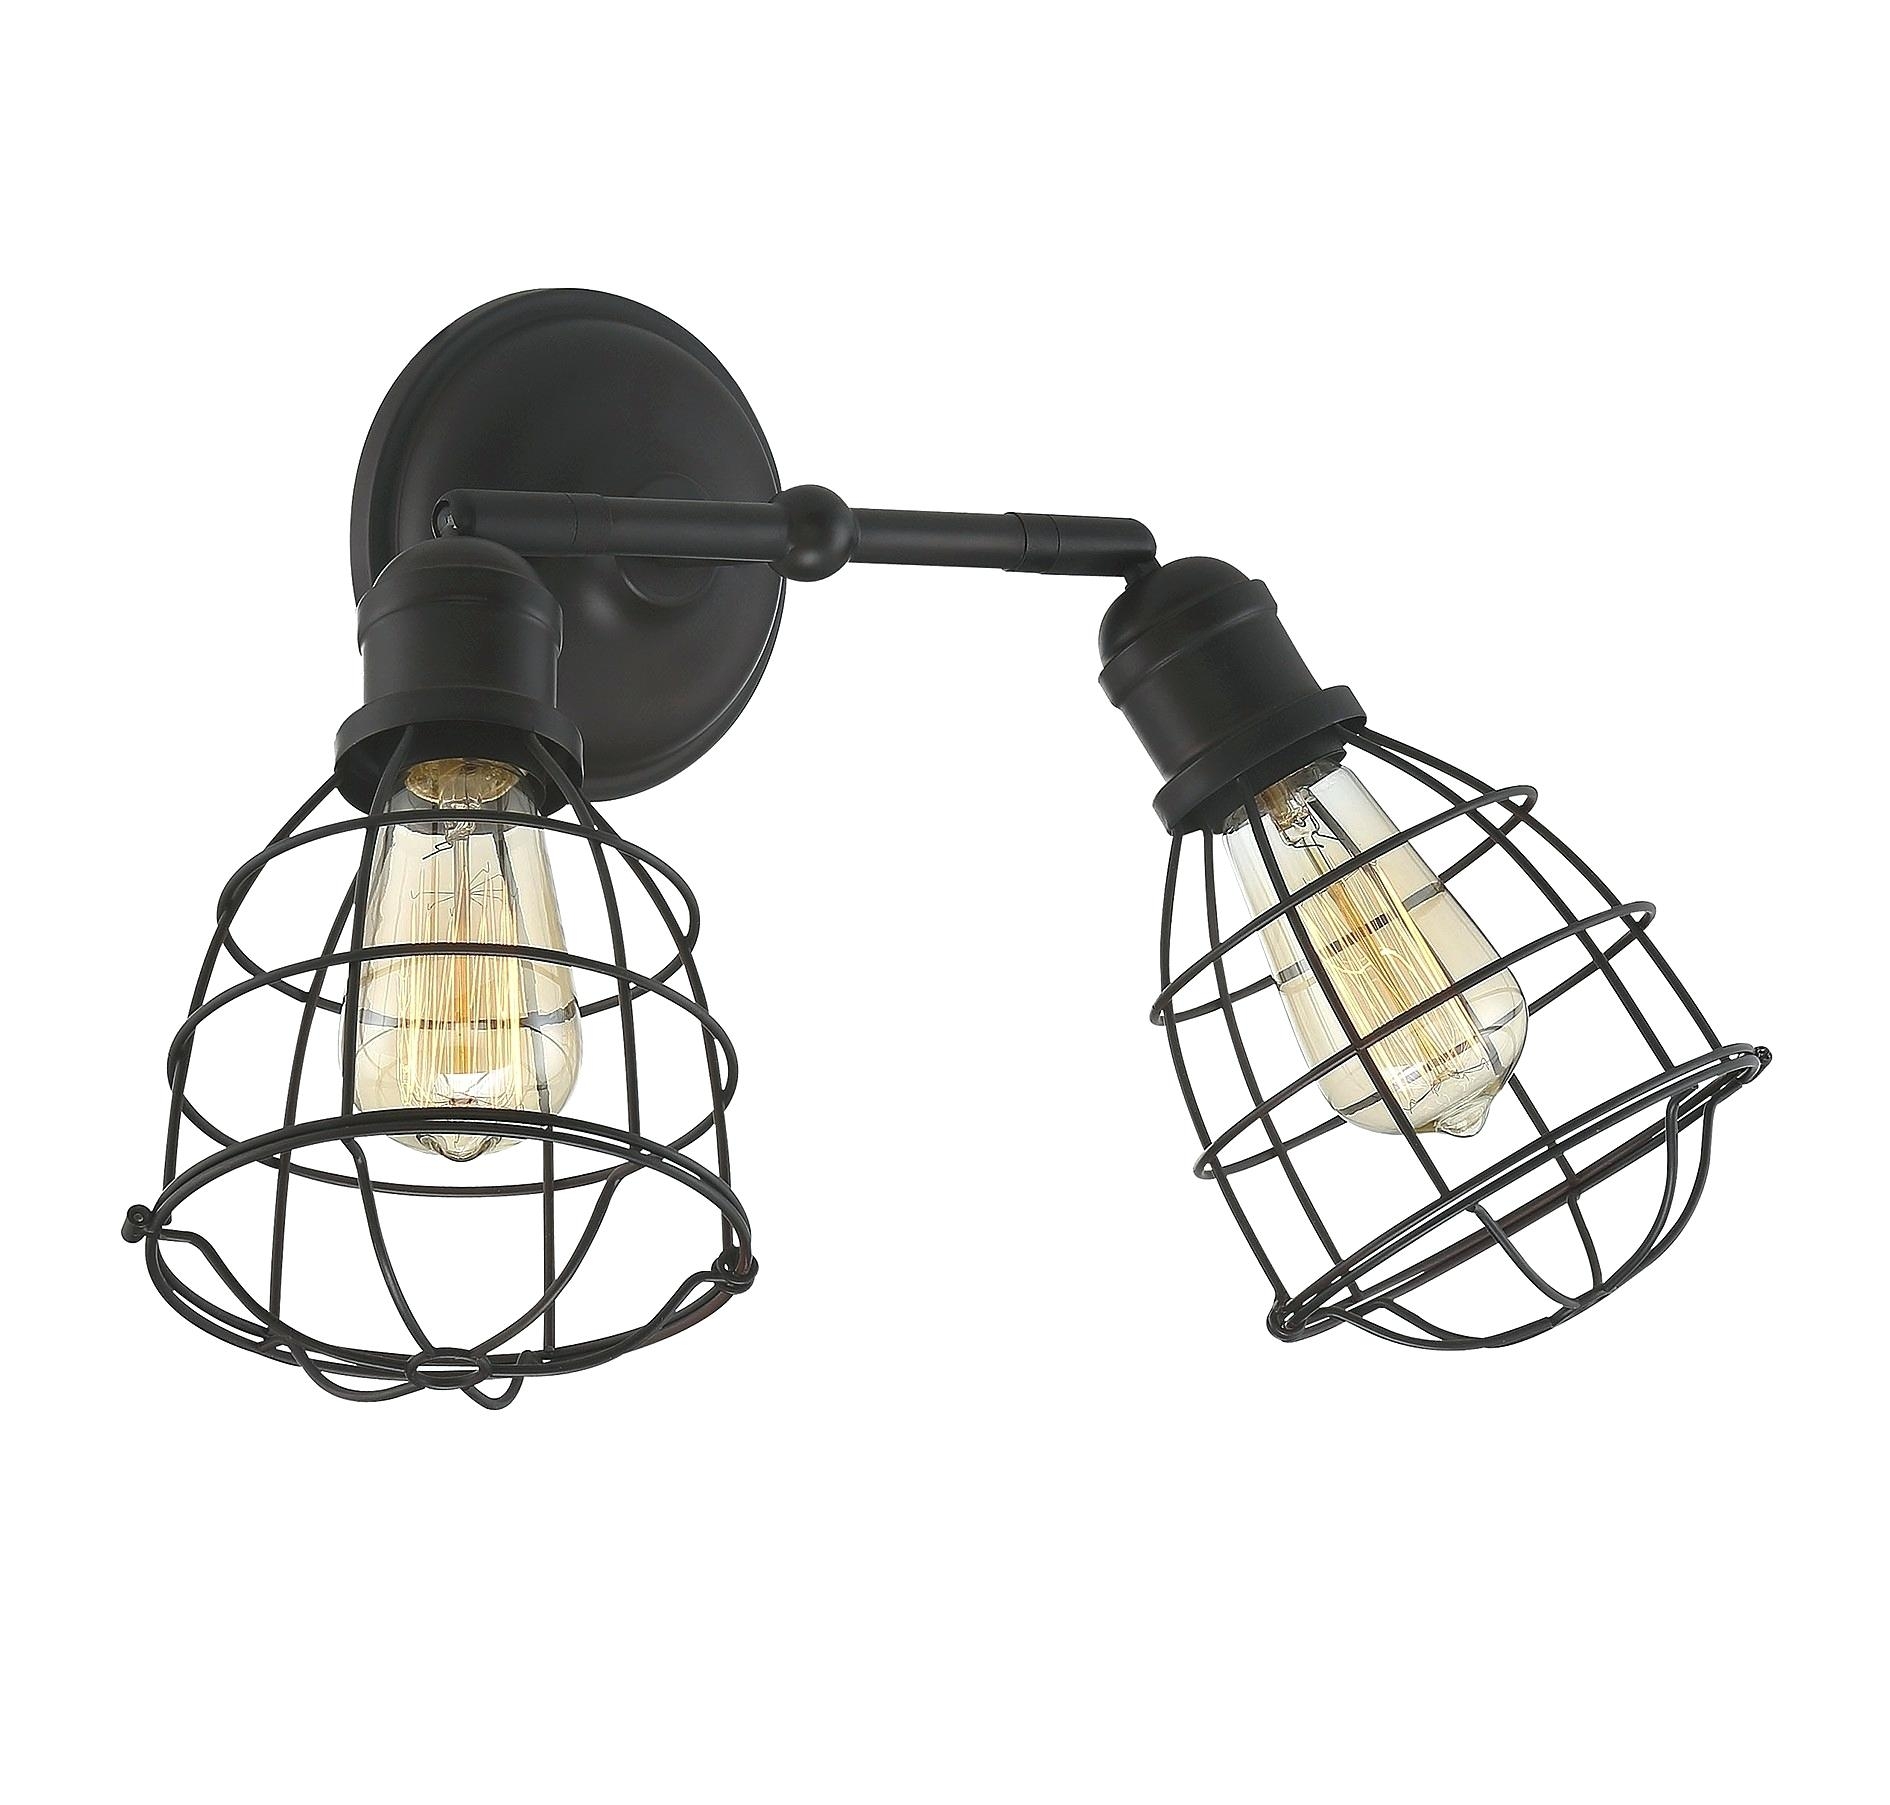 Permalink to Sports Themed Ceiling Light Fixtures